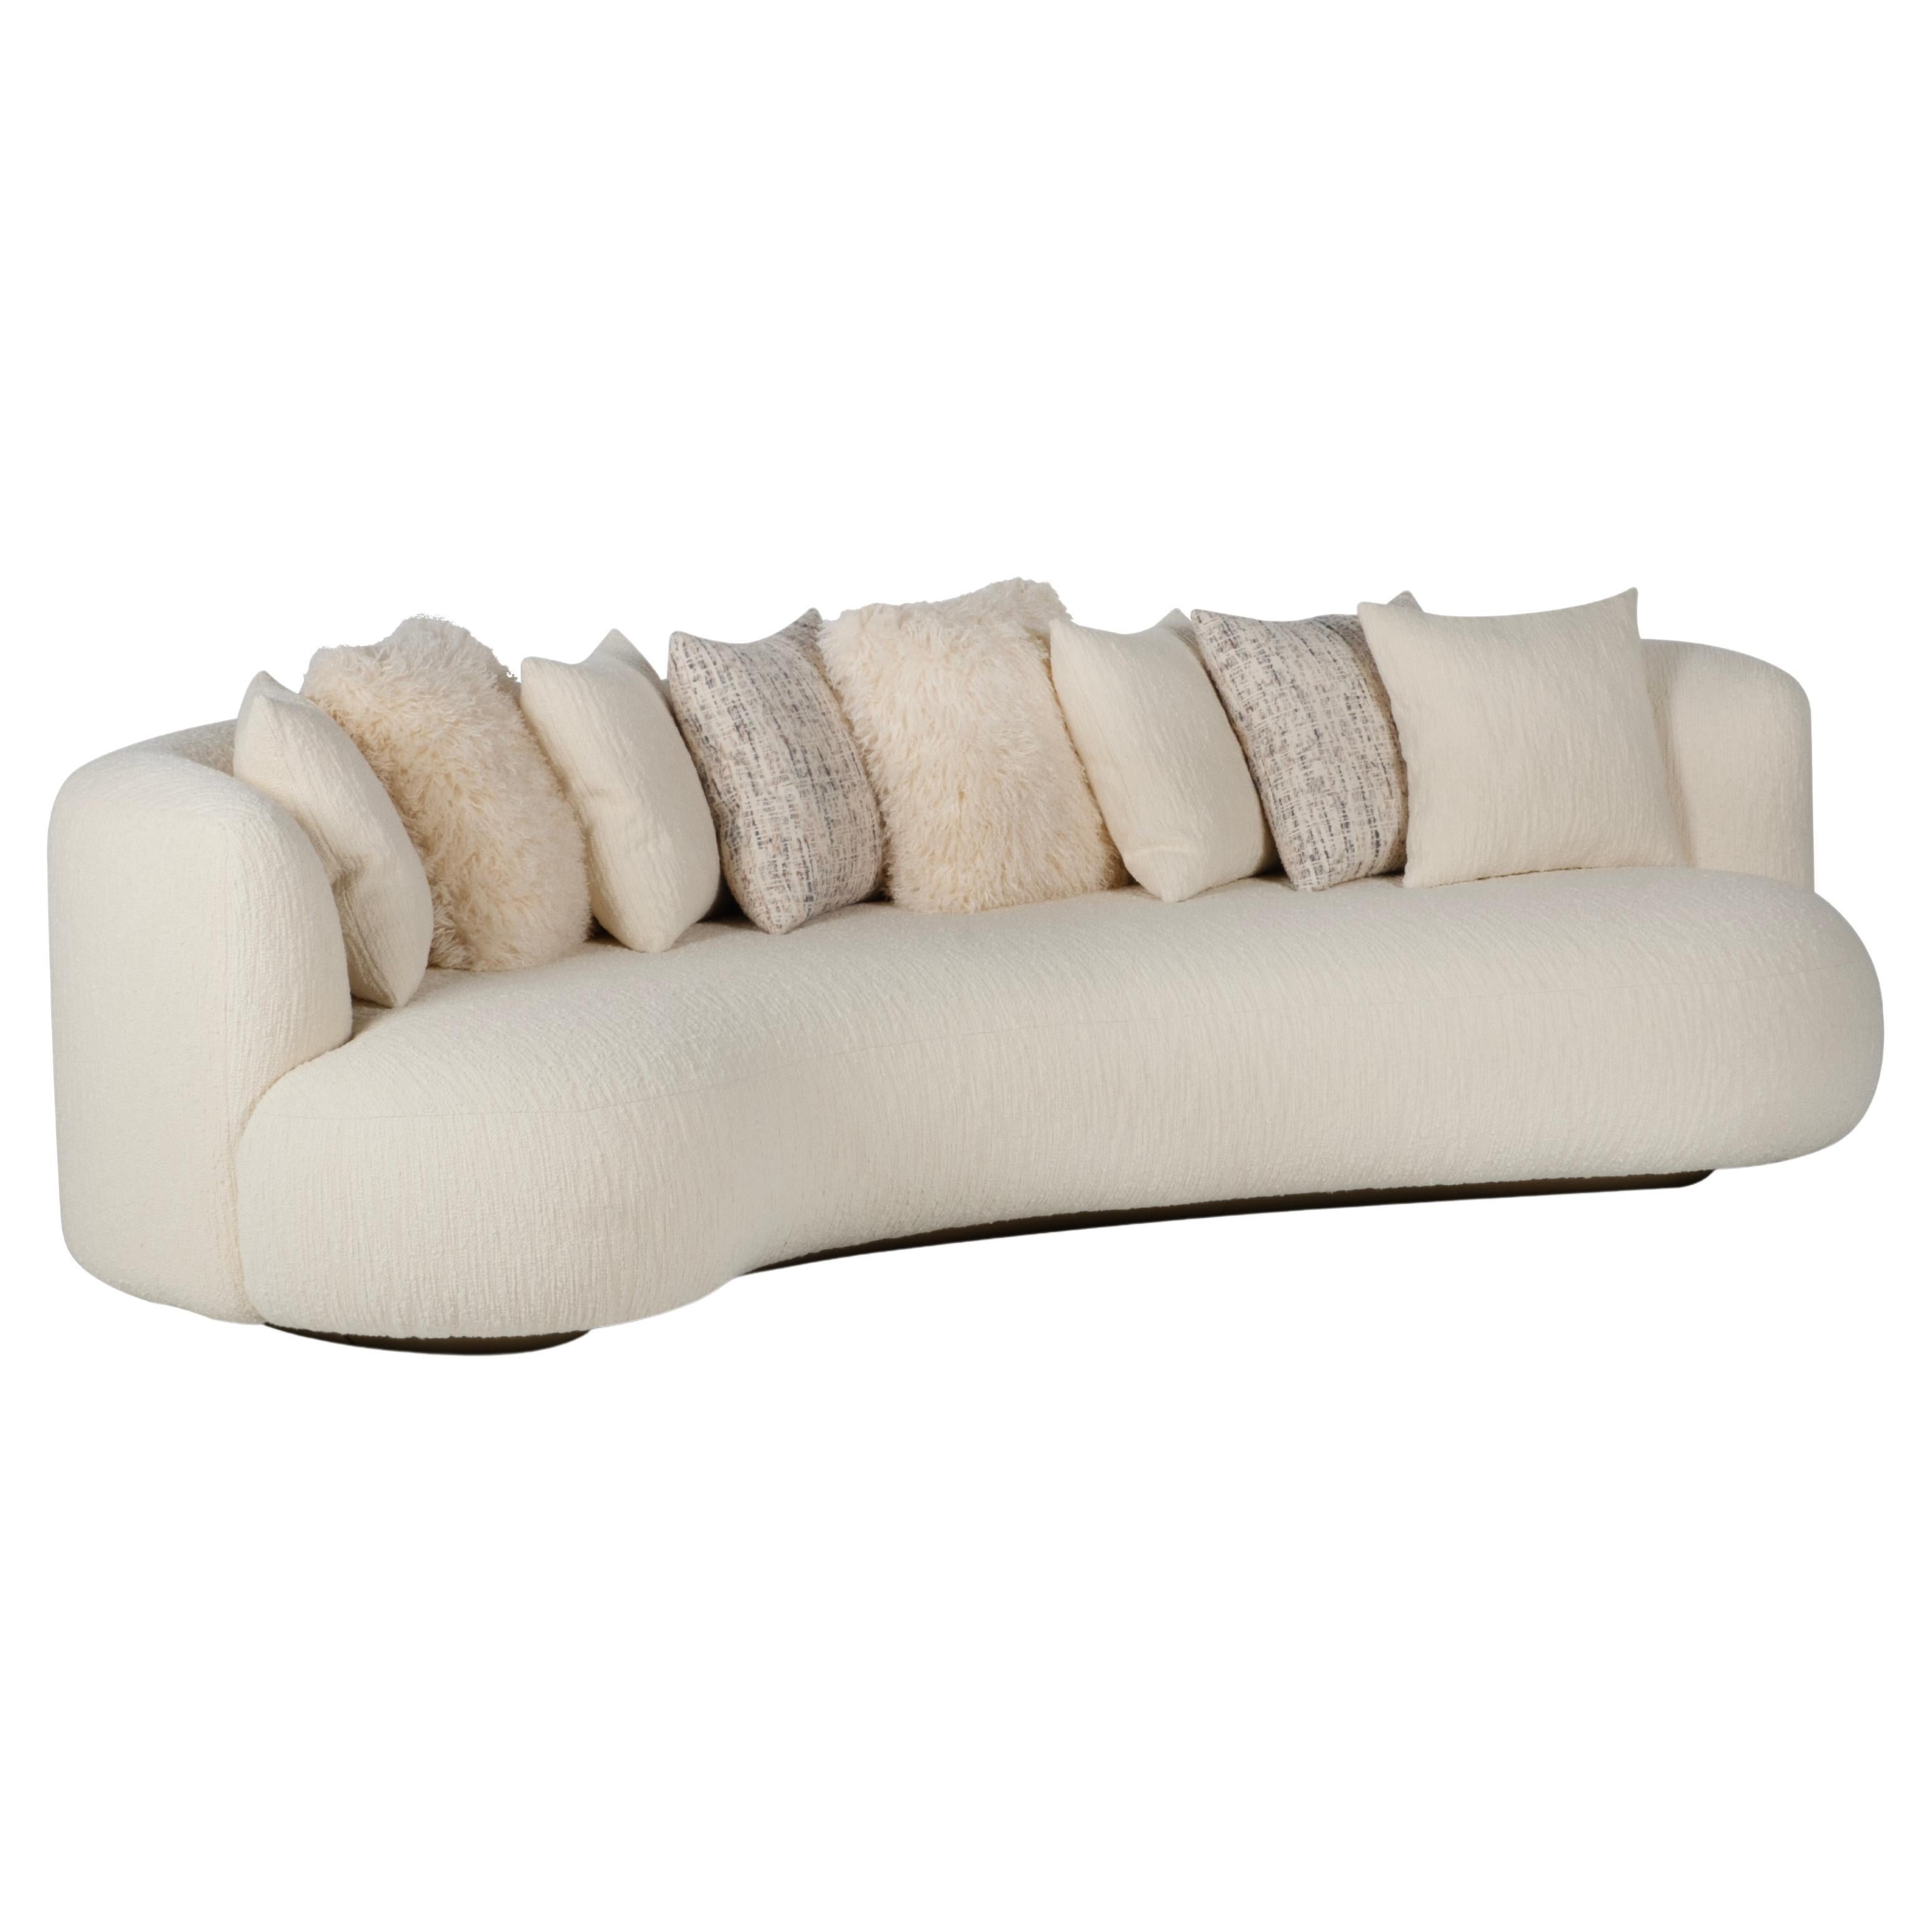 The Moderns Twins Curved Couch, Beige Bouclé, Handmade in Portugal by Greenapple en vente